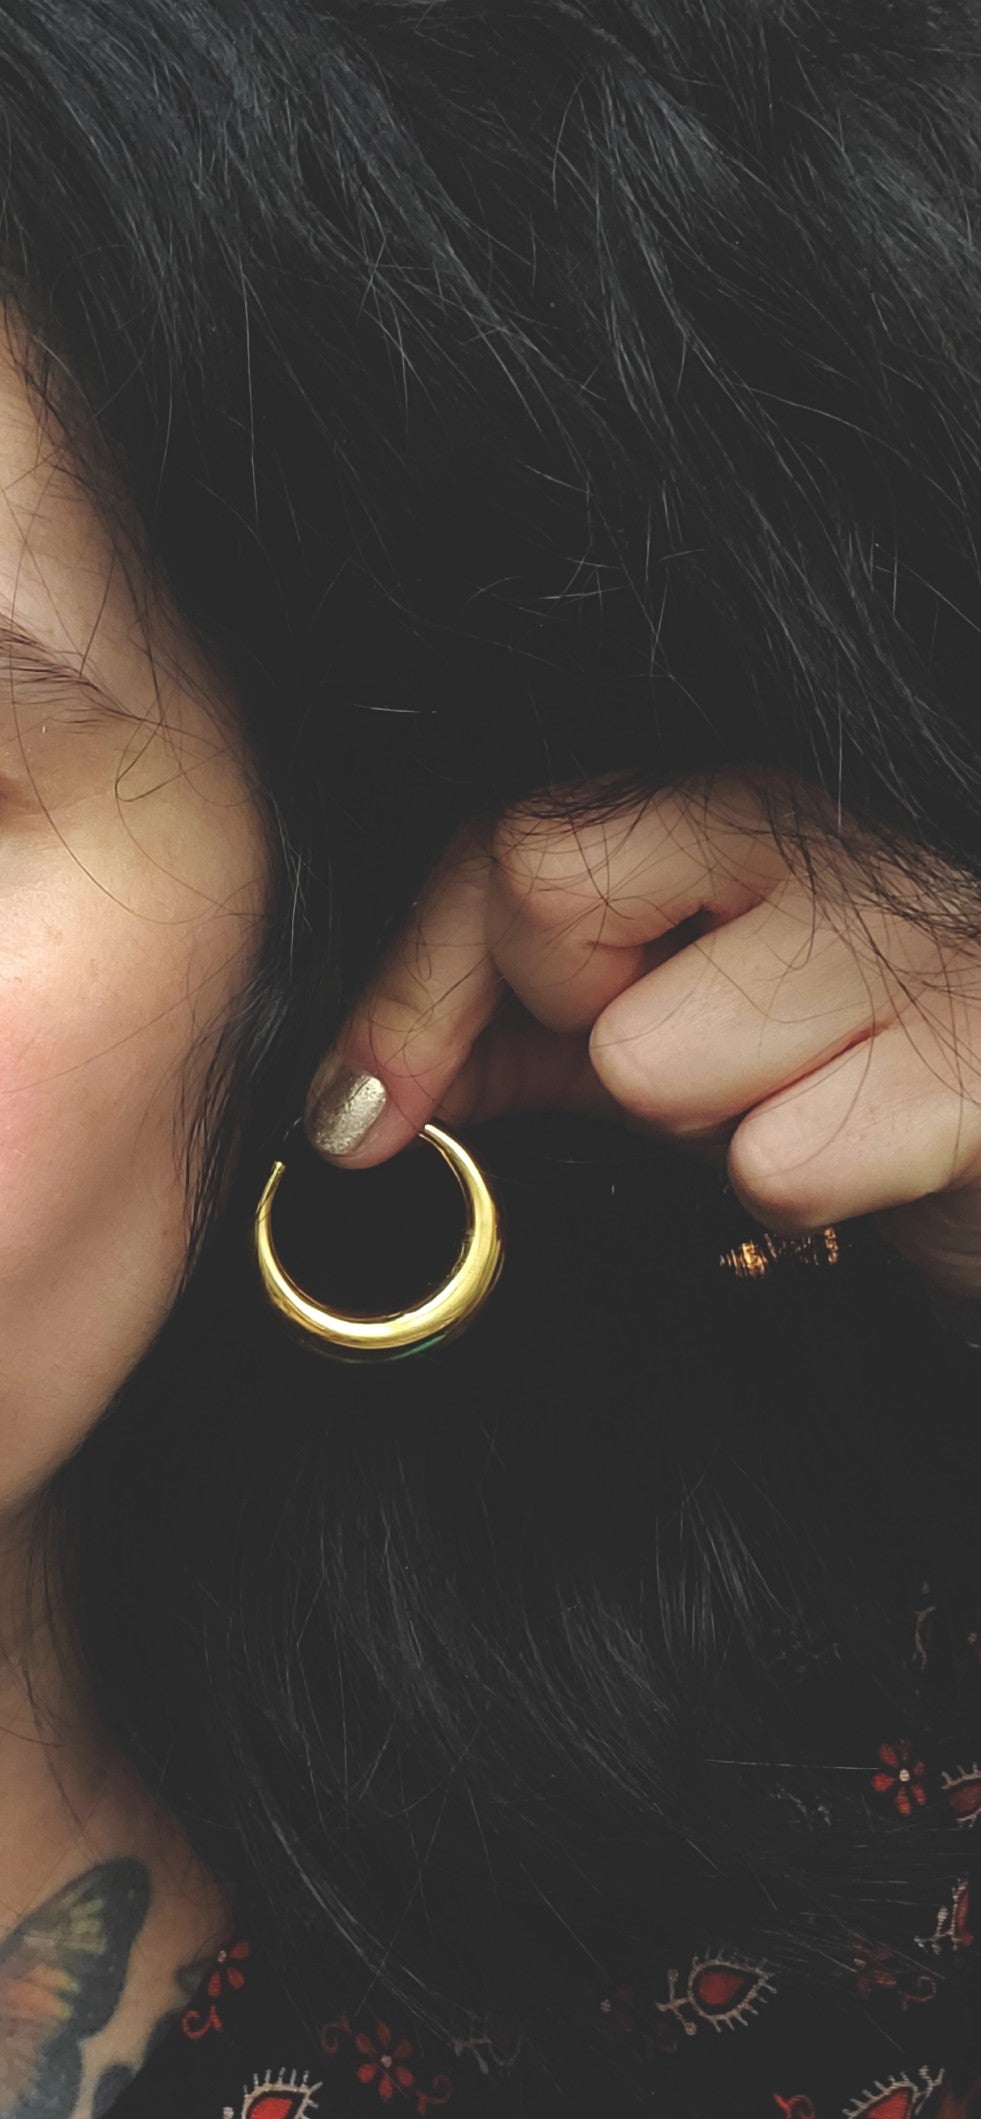 Reserved for A. - Strongly Gilded Silver Hoop Earrings - MEDIUM